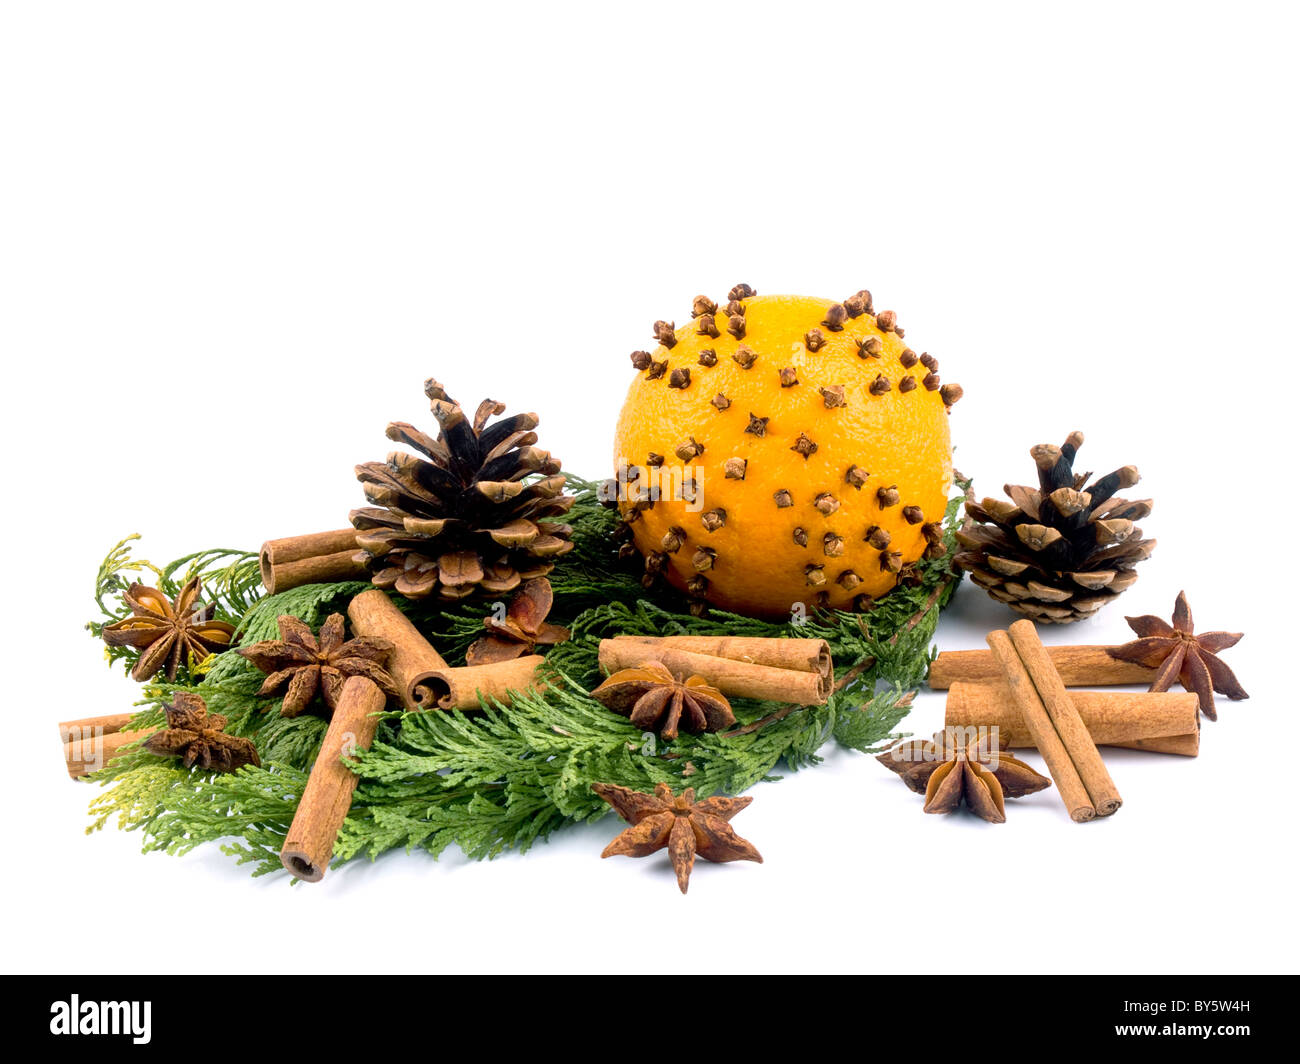 Christmas arrangement with thuja branches and orange with cloves on white background. Stock Photo